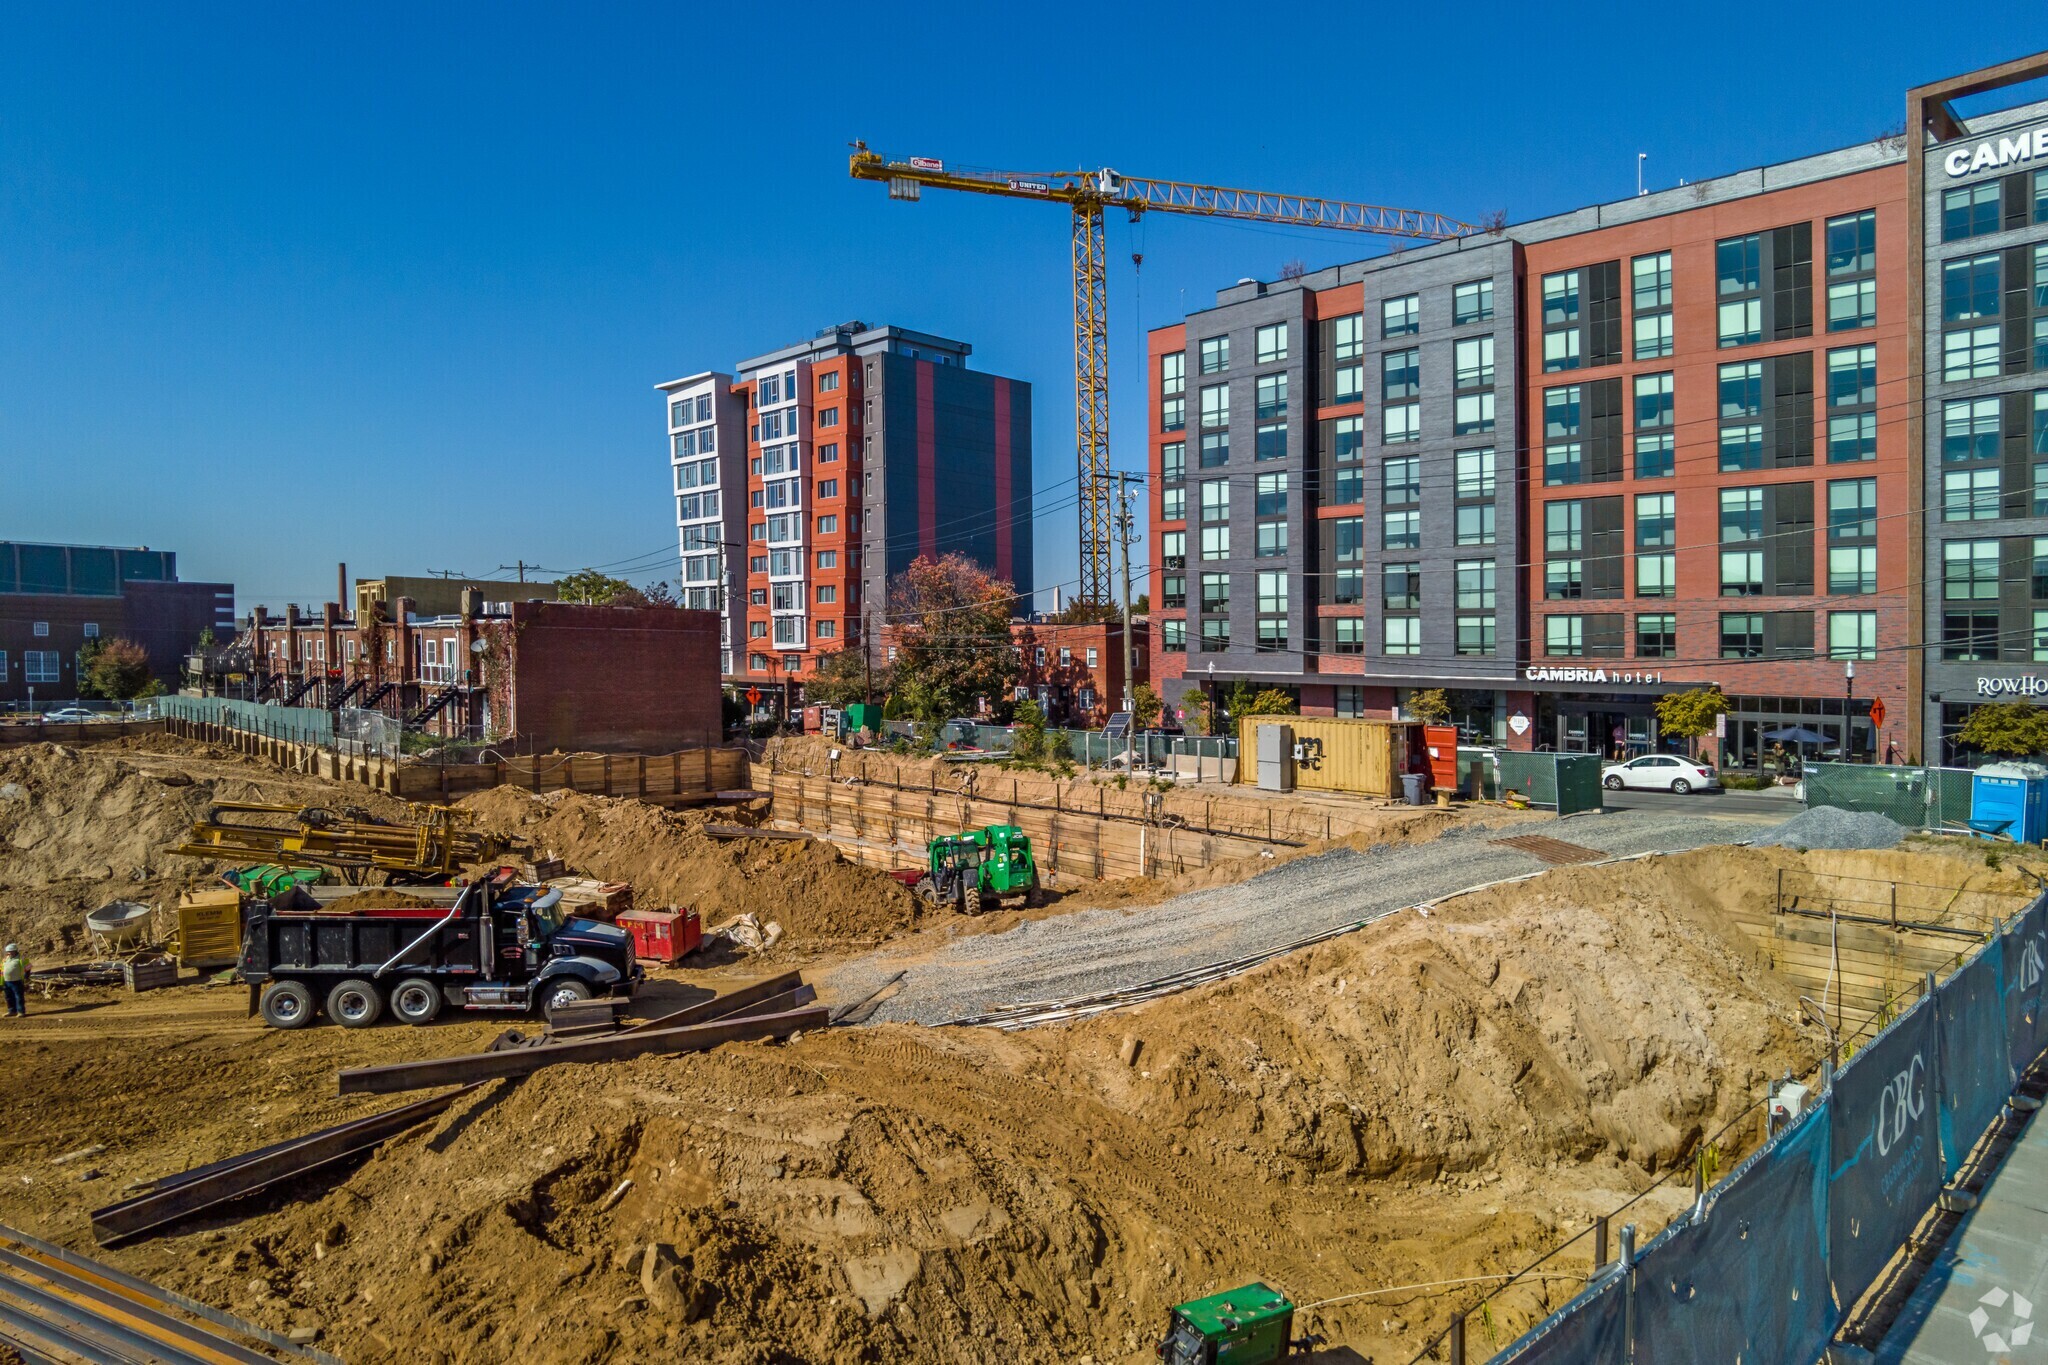 Multifamily development is the leading target of funds raised to be deployed in federally designated opportunity zones such as Washington, D.C.’s Buzzard Point neighborhood where the 501-unit Vermeer on Potomac Avenue is under construction. (CoStar)